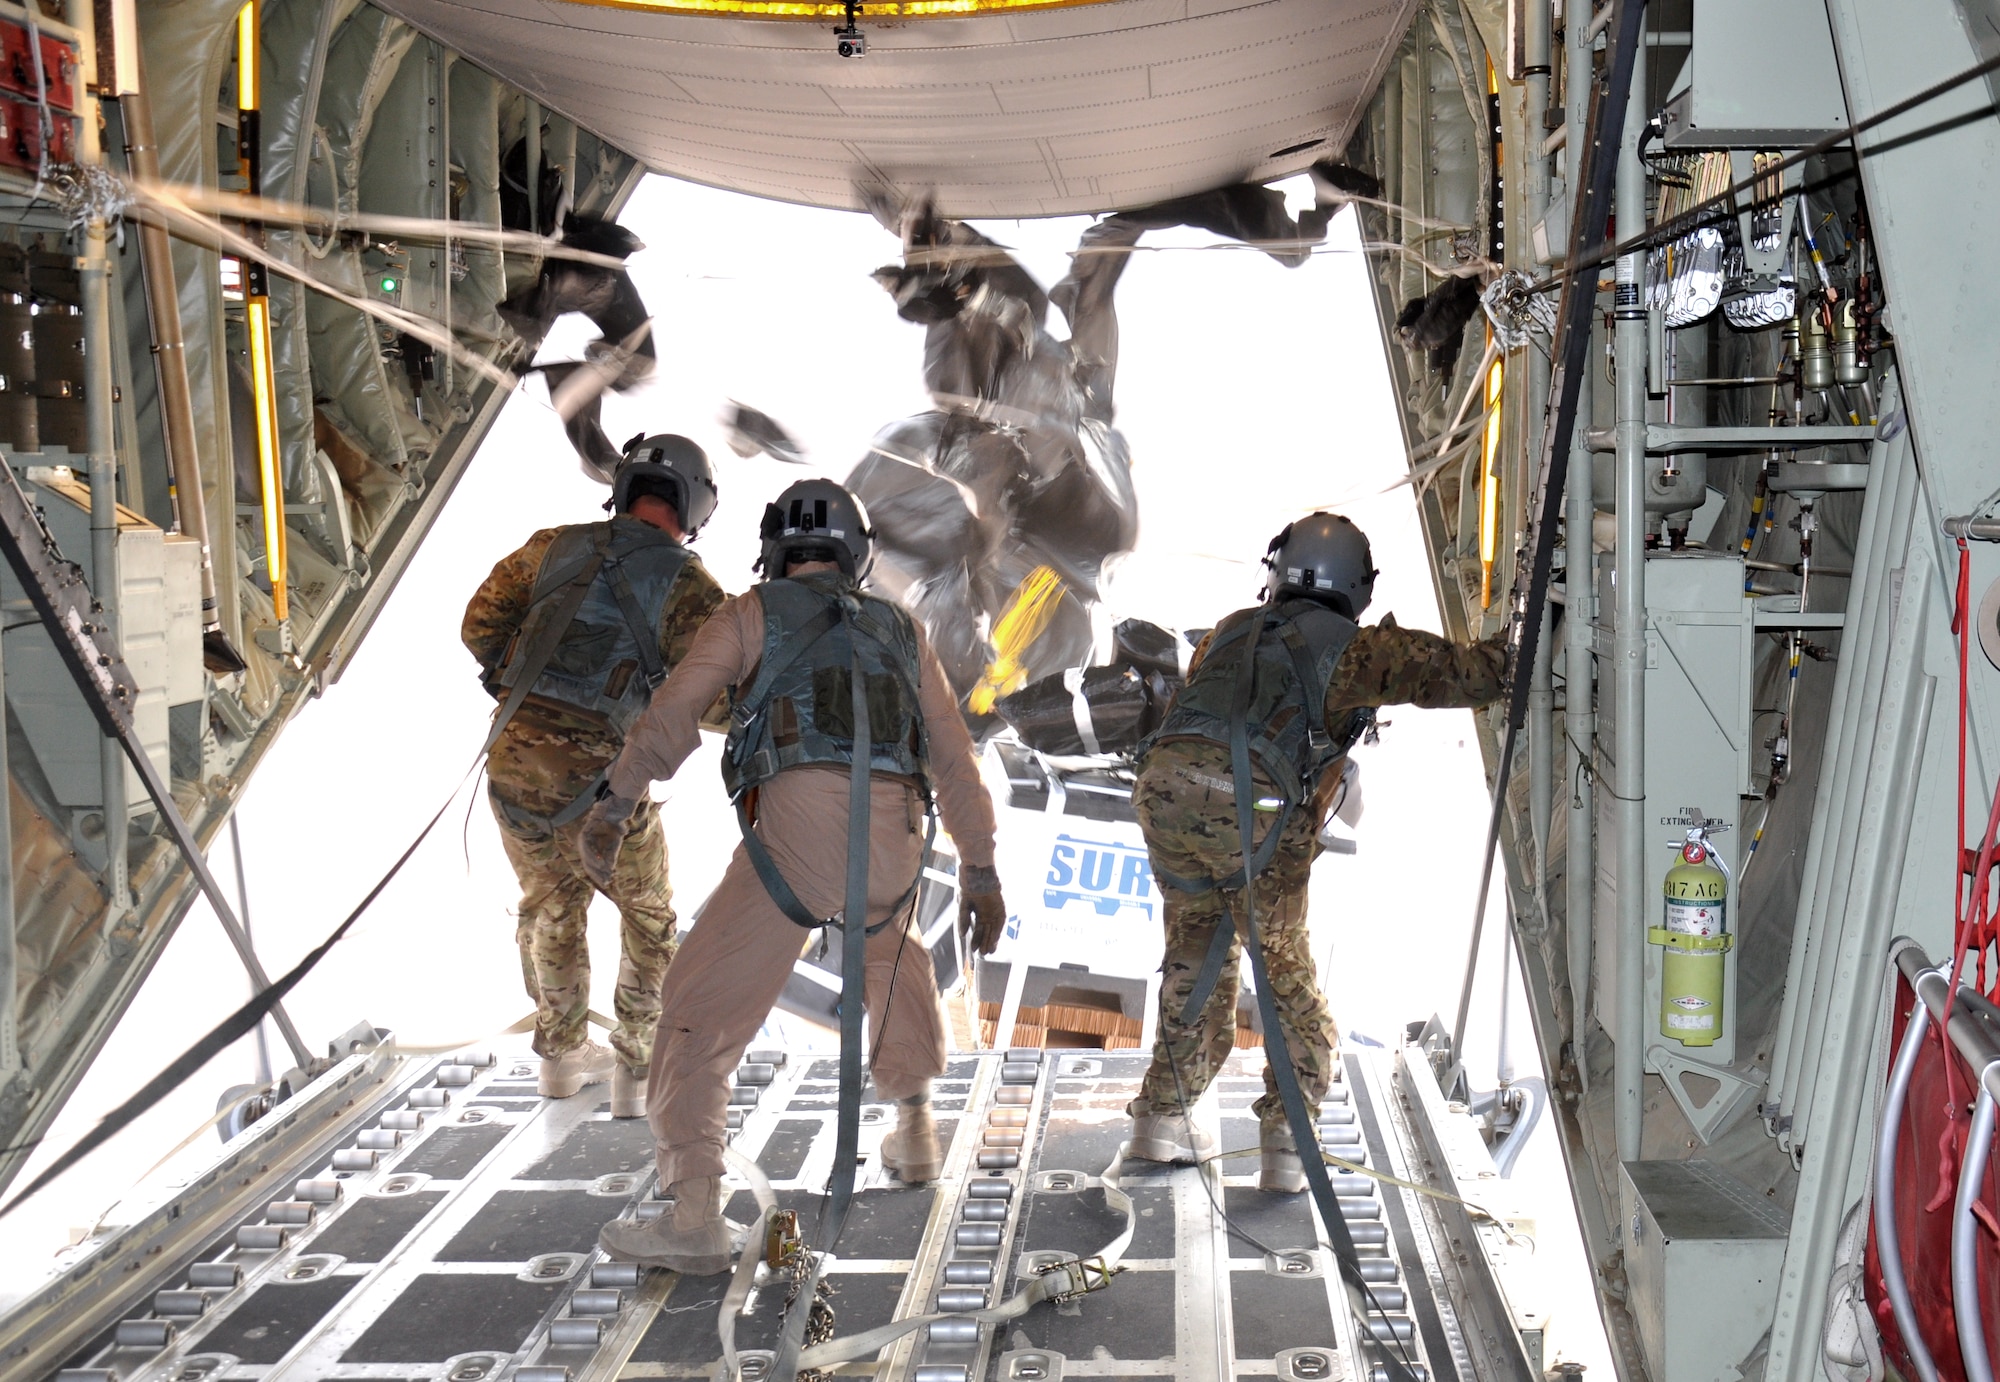 Senior Airman Dan Simonsen, Senior Master Sgt. Steve Martin and Senior Airman Marcus Wright, loadmasters with the 772nd Expeditionary Airlift Squadron, perform a Low Cost, Low Altitude airdrop from the back of a C-130J in southwest Afghanistan Nov. 15. They are deployed from Dyess Air Force Base, Texas. (U.S. Air Force photo/Capt. Tristan Hinderliter)